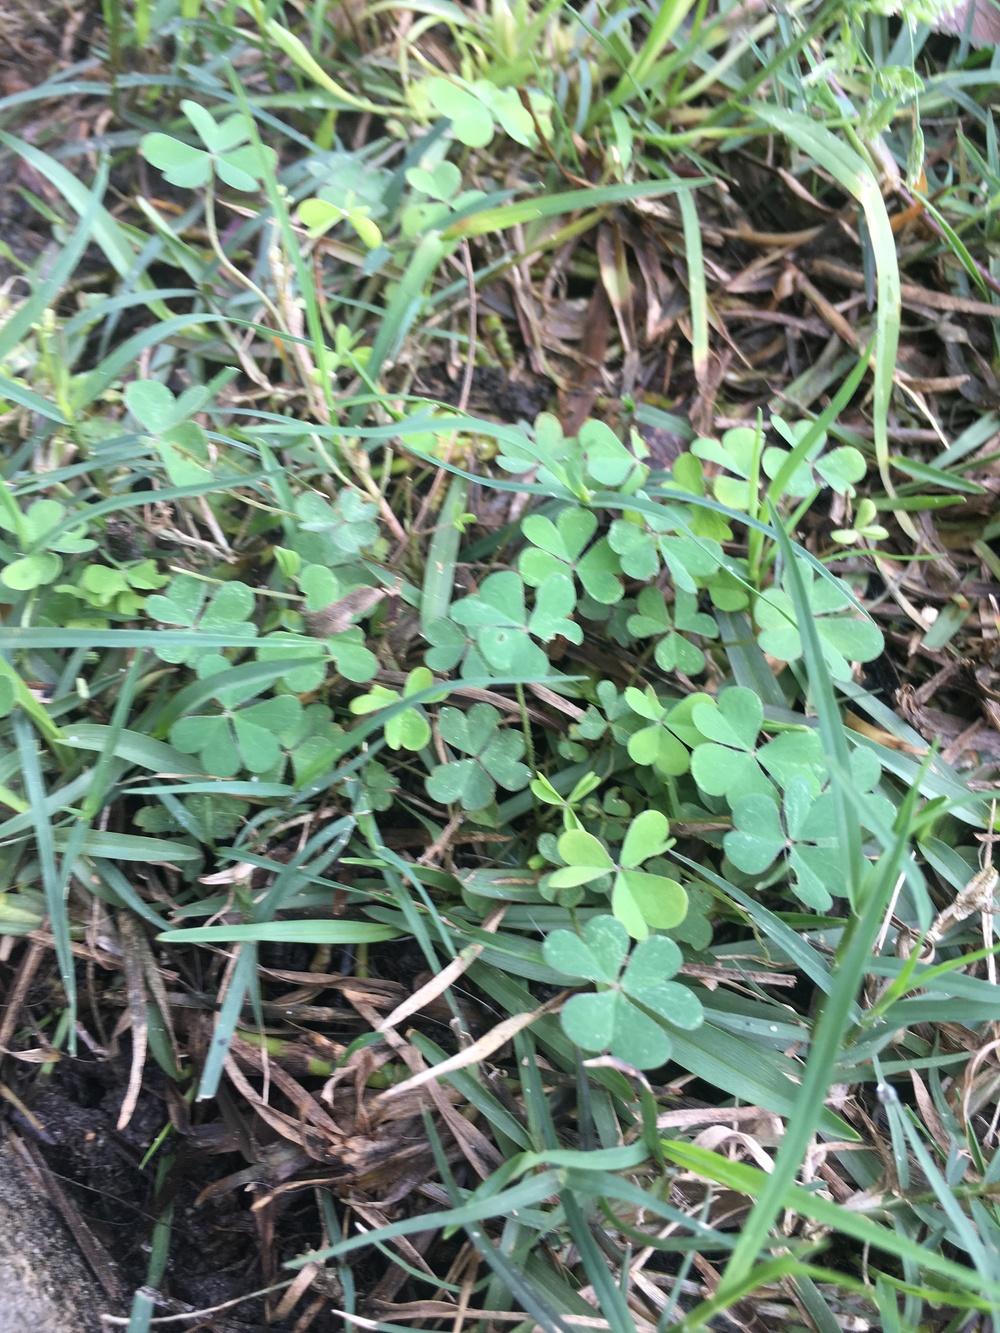 Plant ID forum: Weeds in lawn not being controlled by weed ...